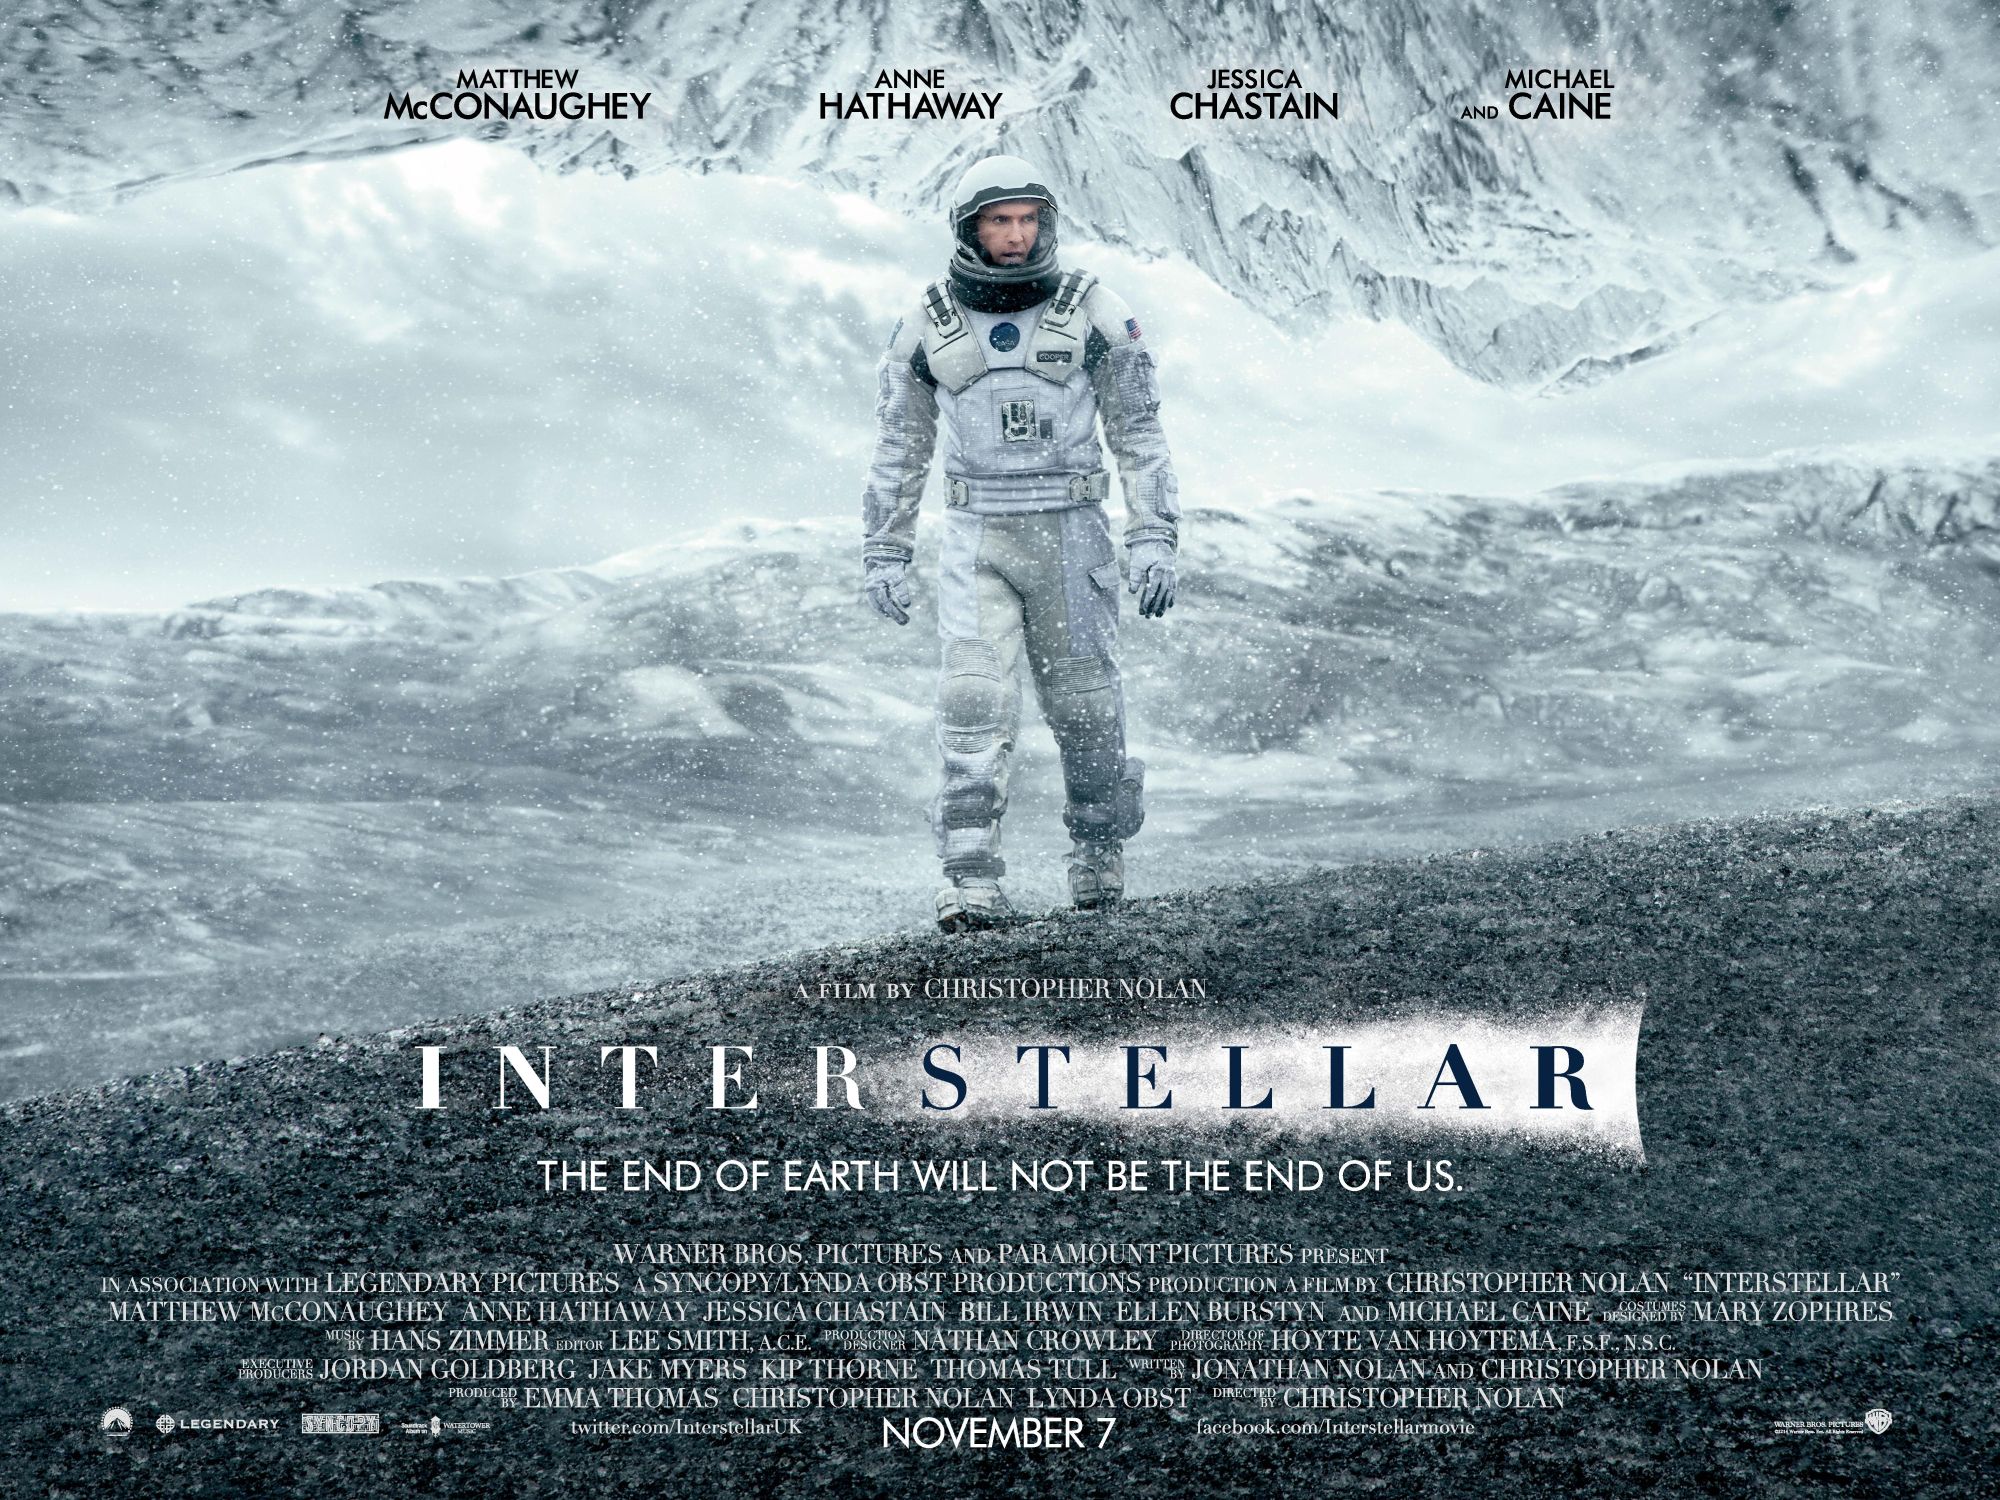 ‘interstellar’ review: a cosmic voyage of epic proportions